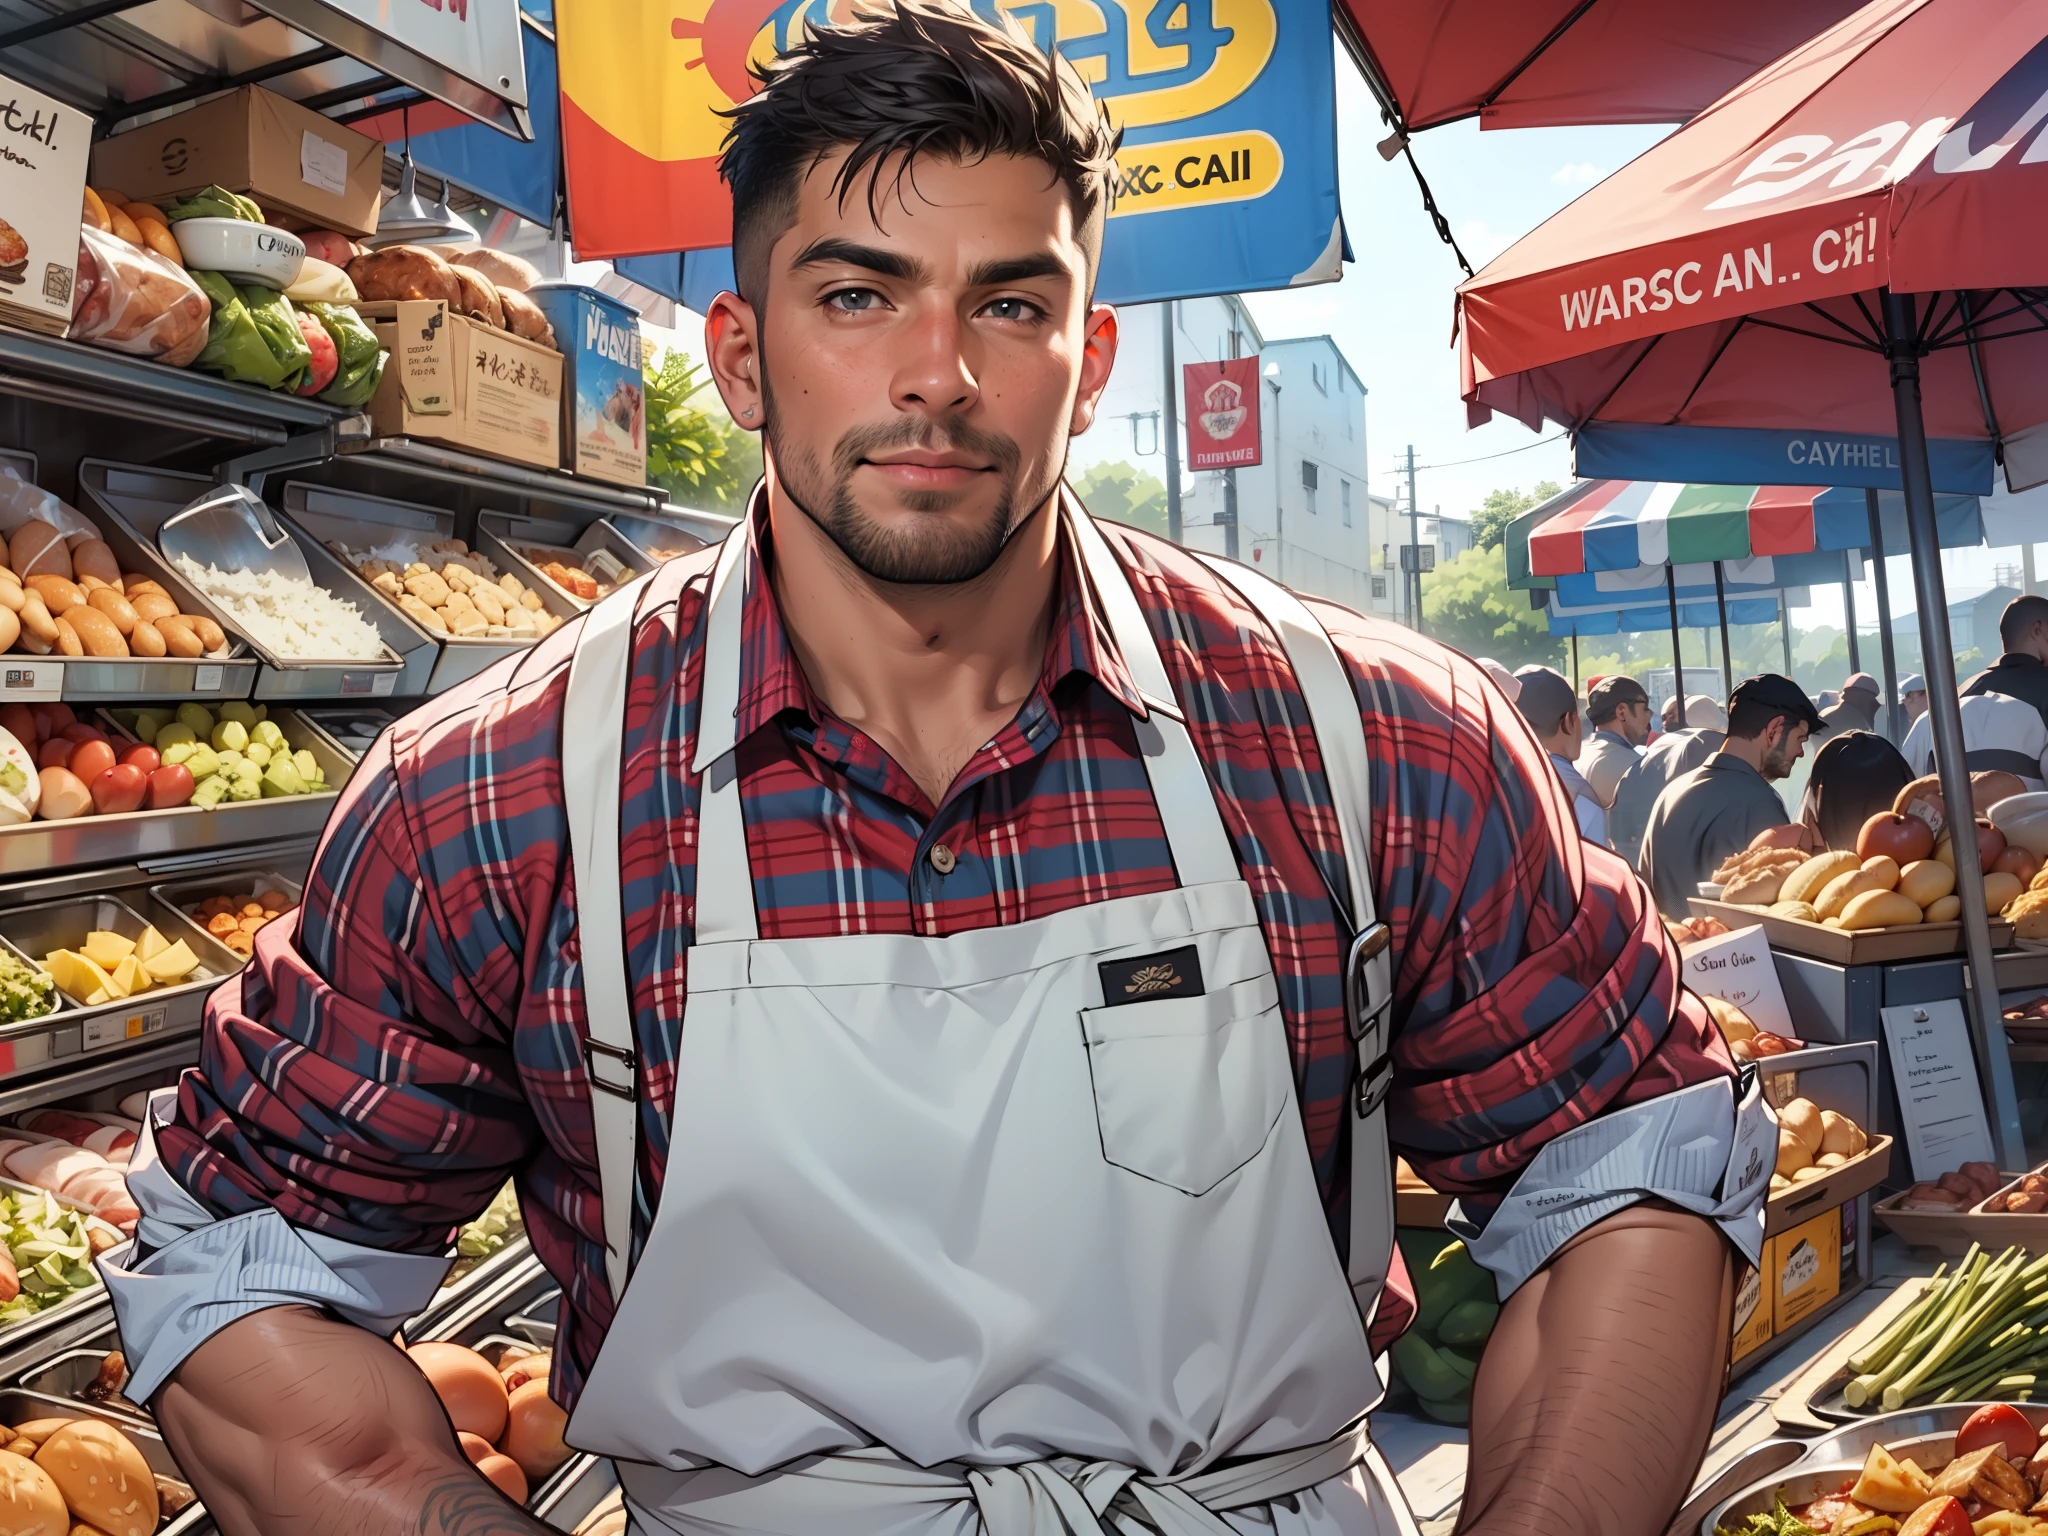 sexy mature daddy, tanned-skin, big bulge, darker skin, stubble, muscular, celebrated chef, outdoor food market, casual chef’s attire, culinary exploration